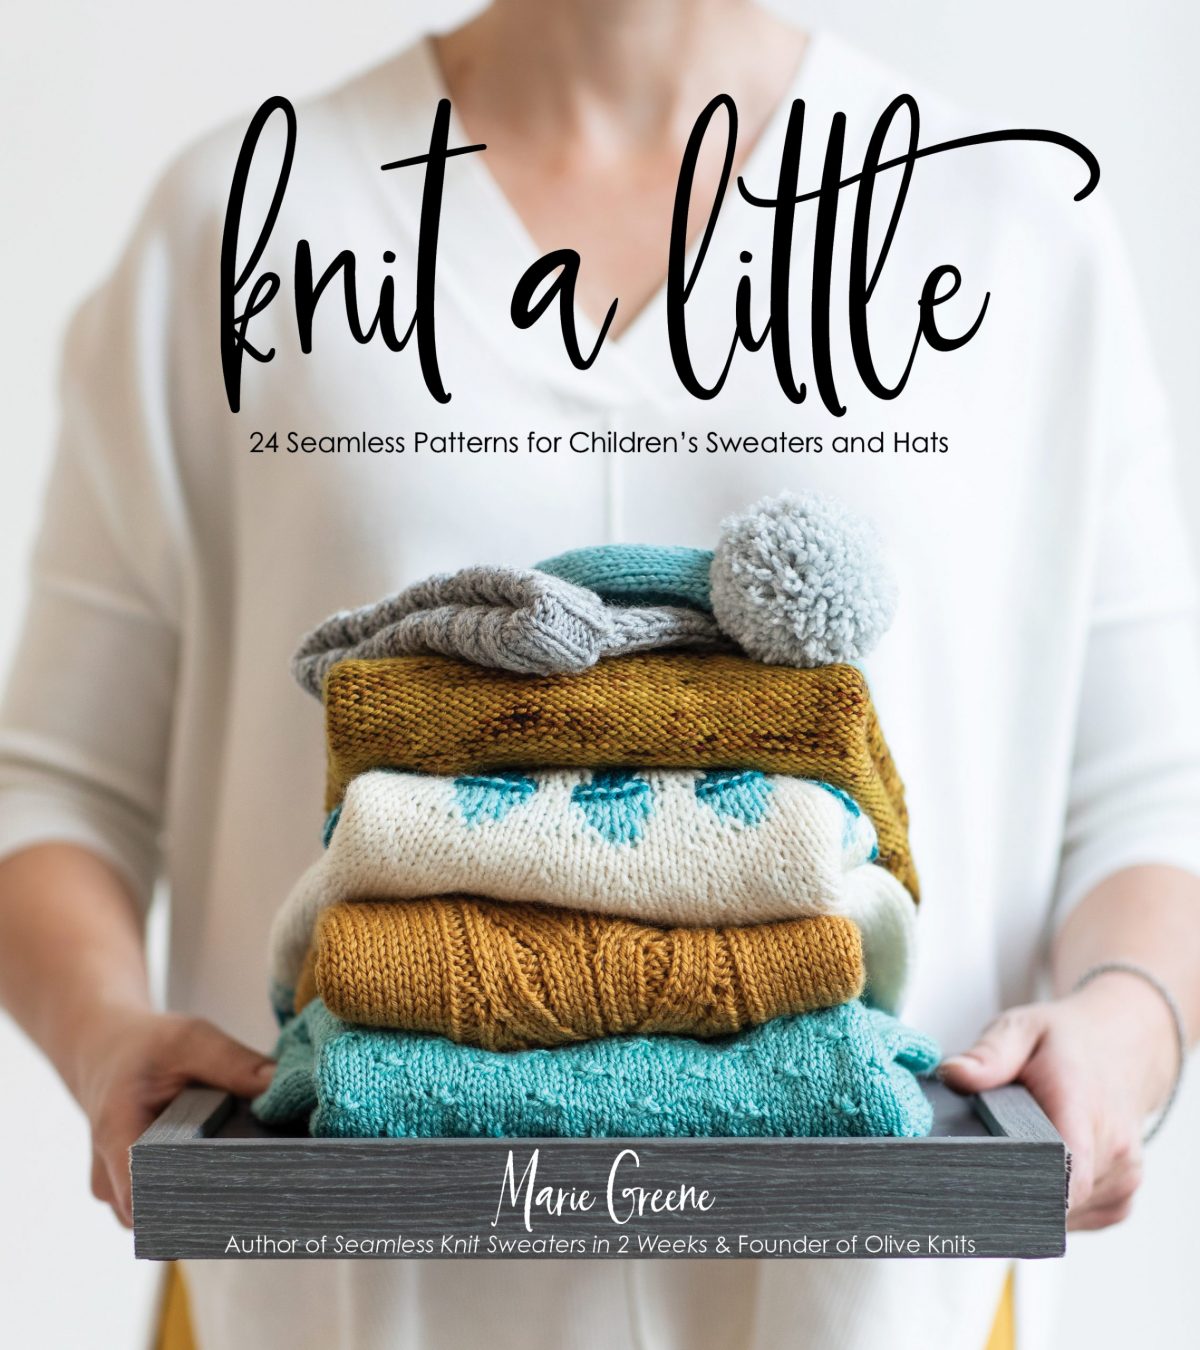 Knit a Little: 24 Seamless Patterns for Children’s Sweaters & Hats